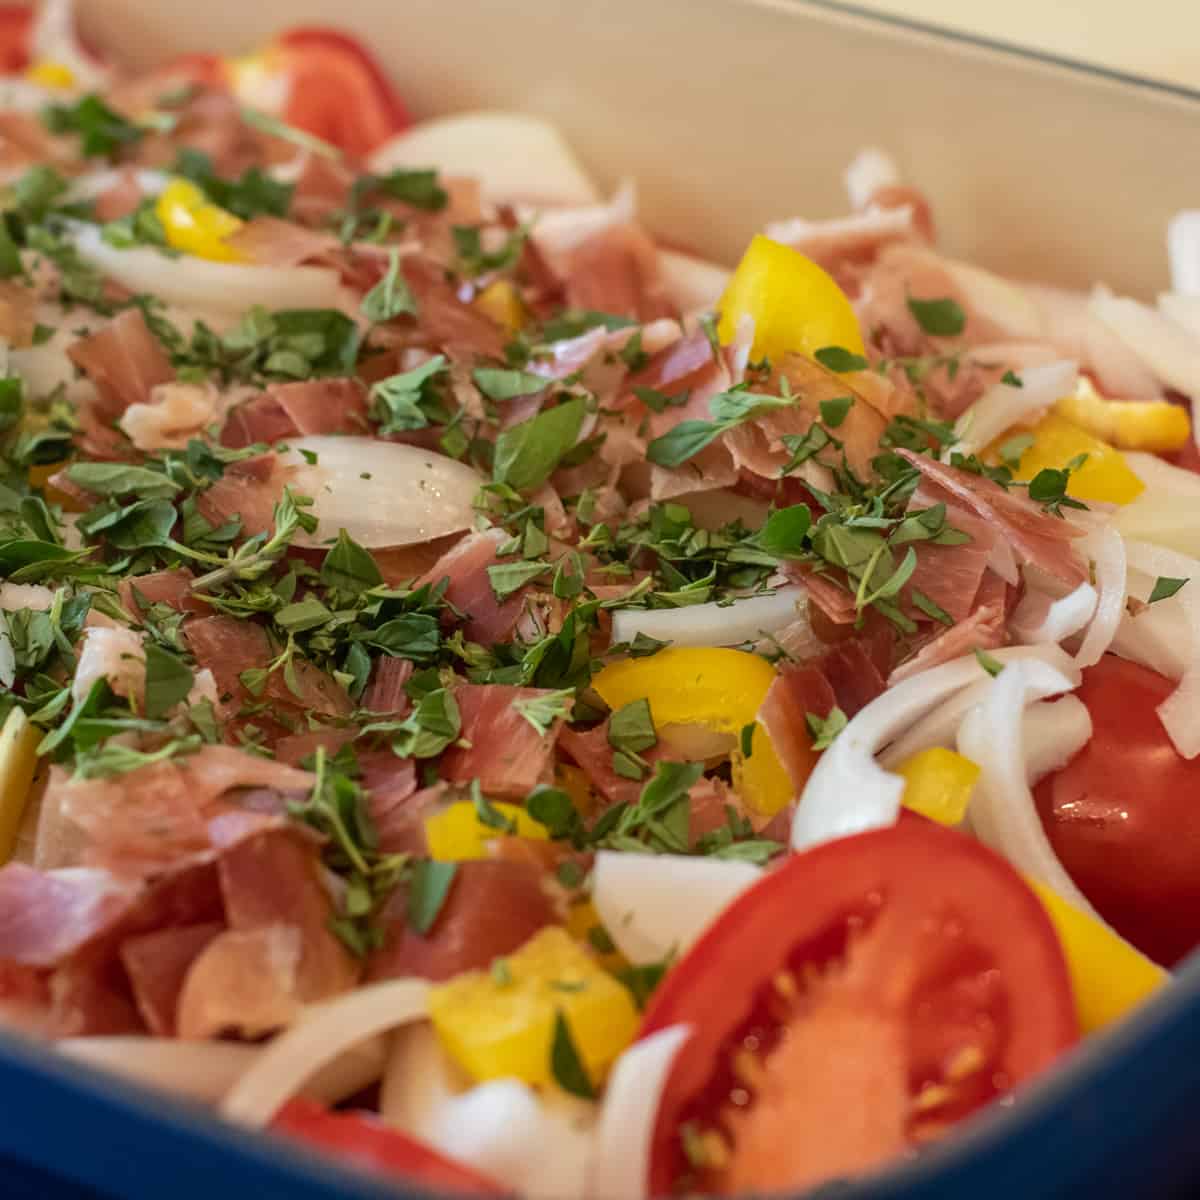 Chopped prosciutto and minced fresh oregano on a bed of tomatoes, onions and pepper.